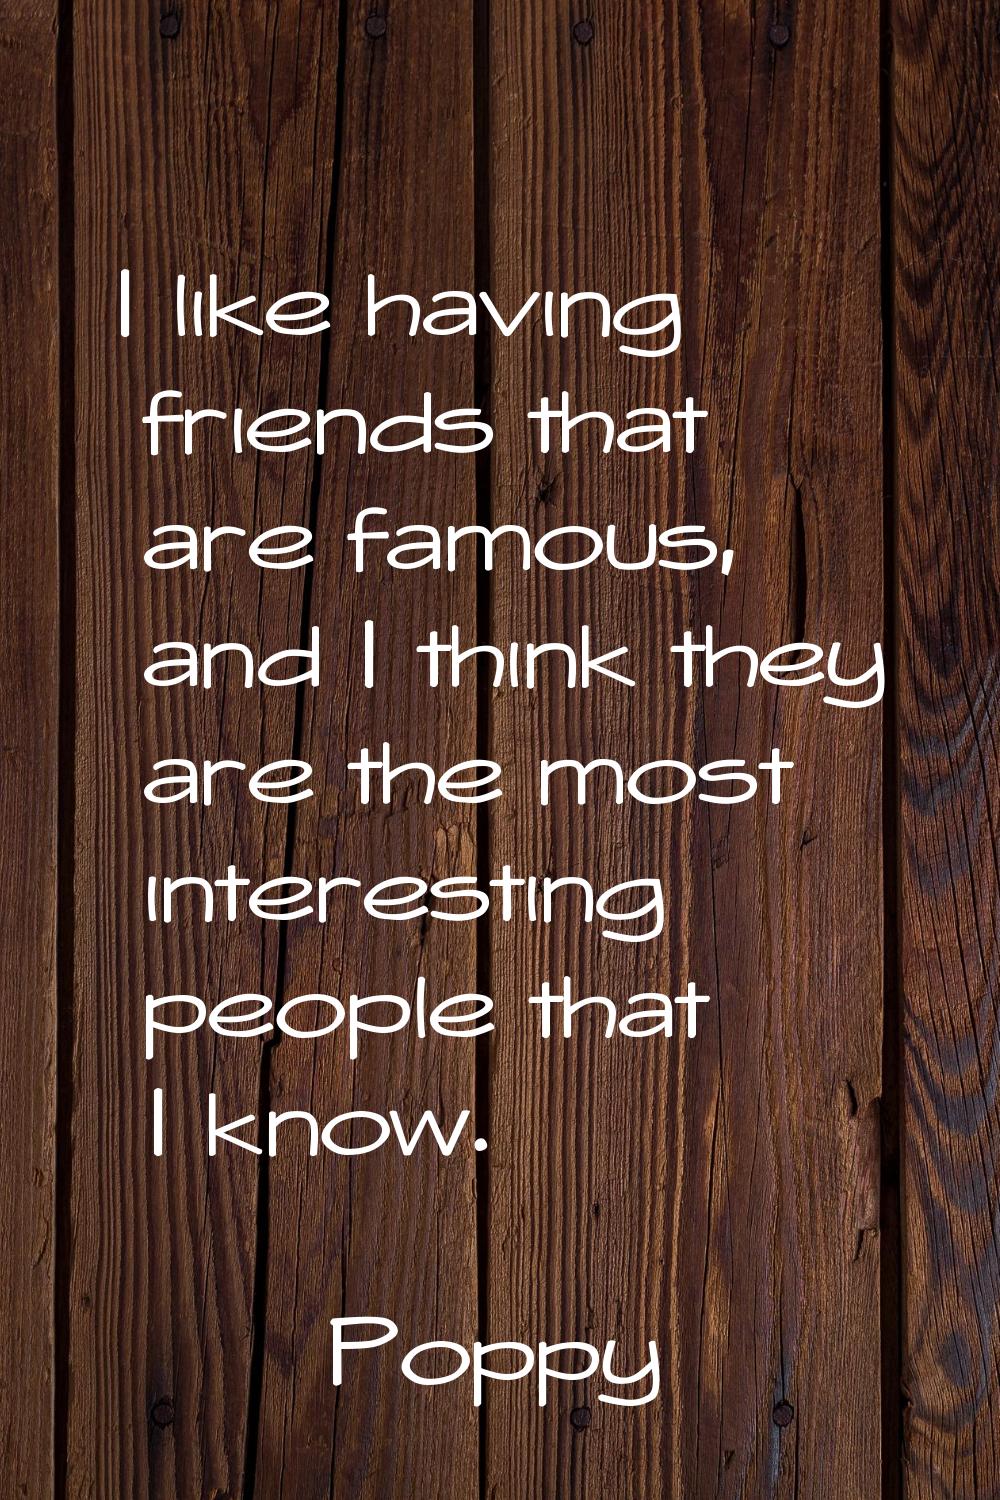 I like having friends that are famous, and I think they are the most interesting people that I know